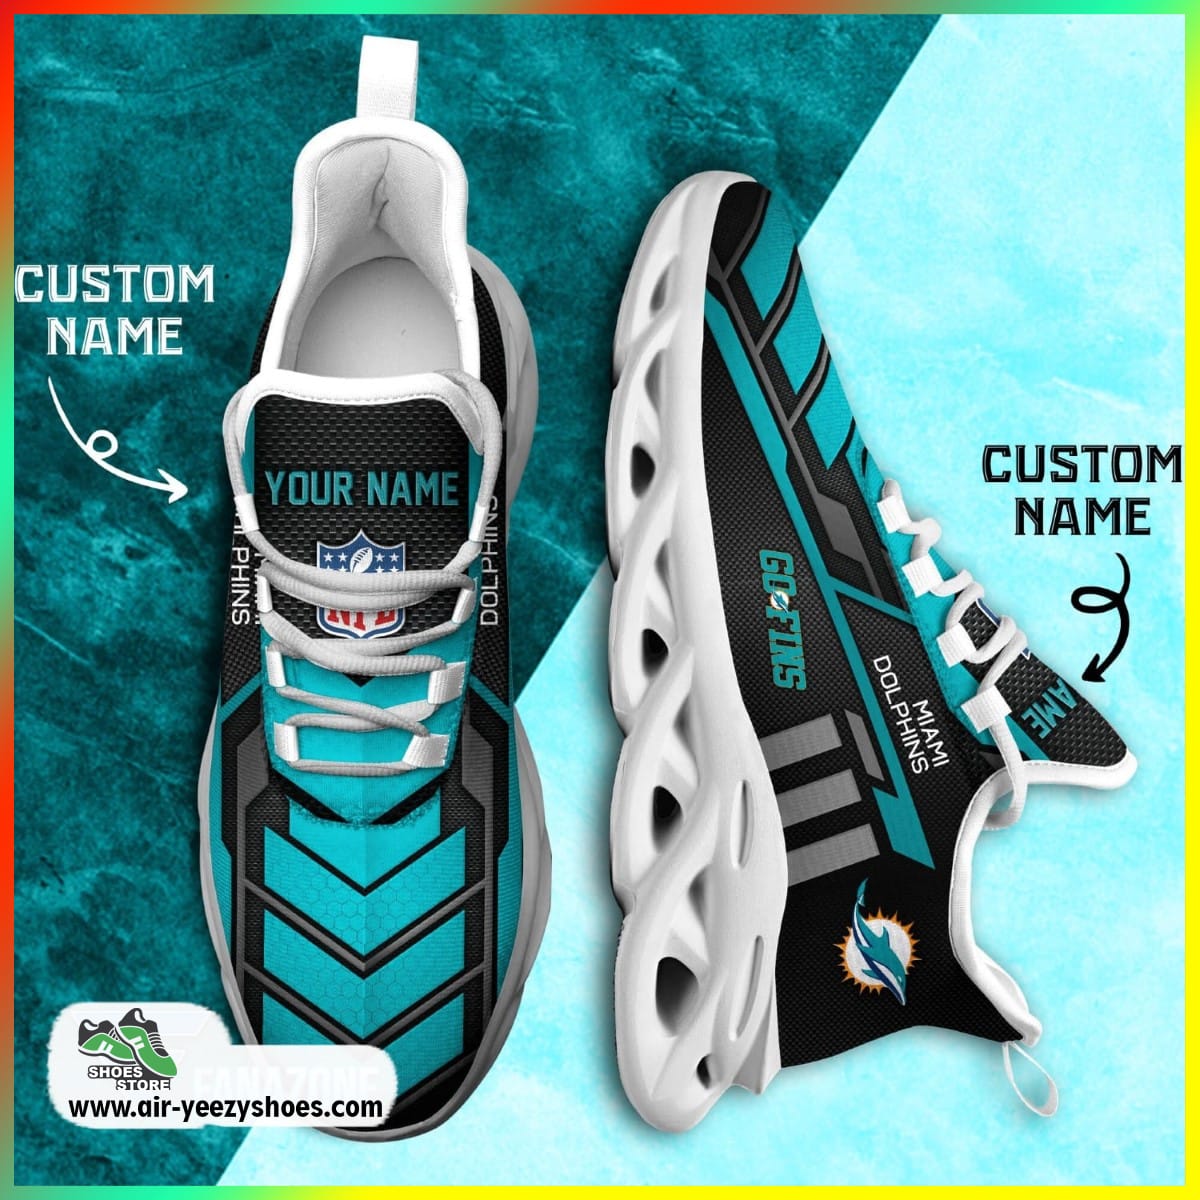 Miami Dolphins NFL Custom Sport Shoes For Fans, Miami Dolphins Merch